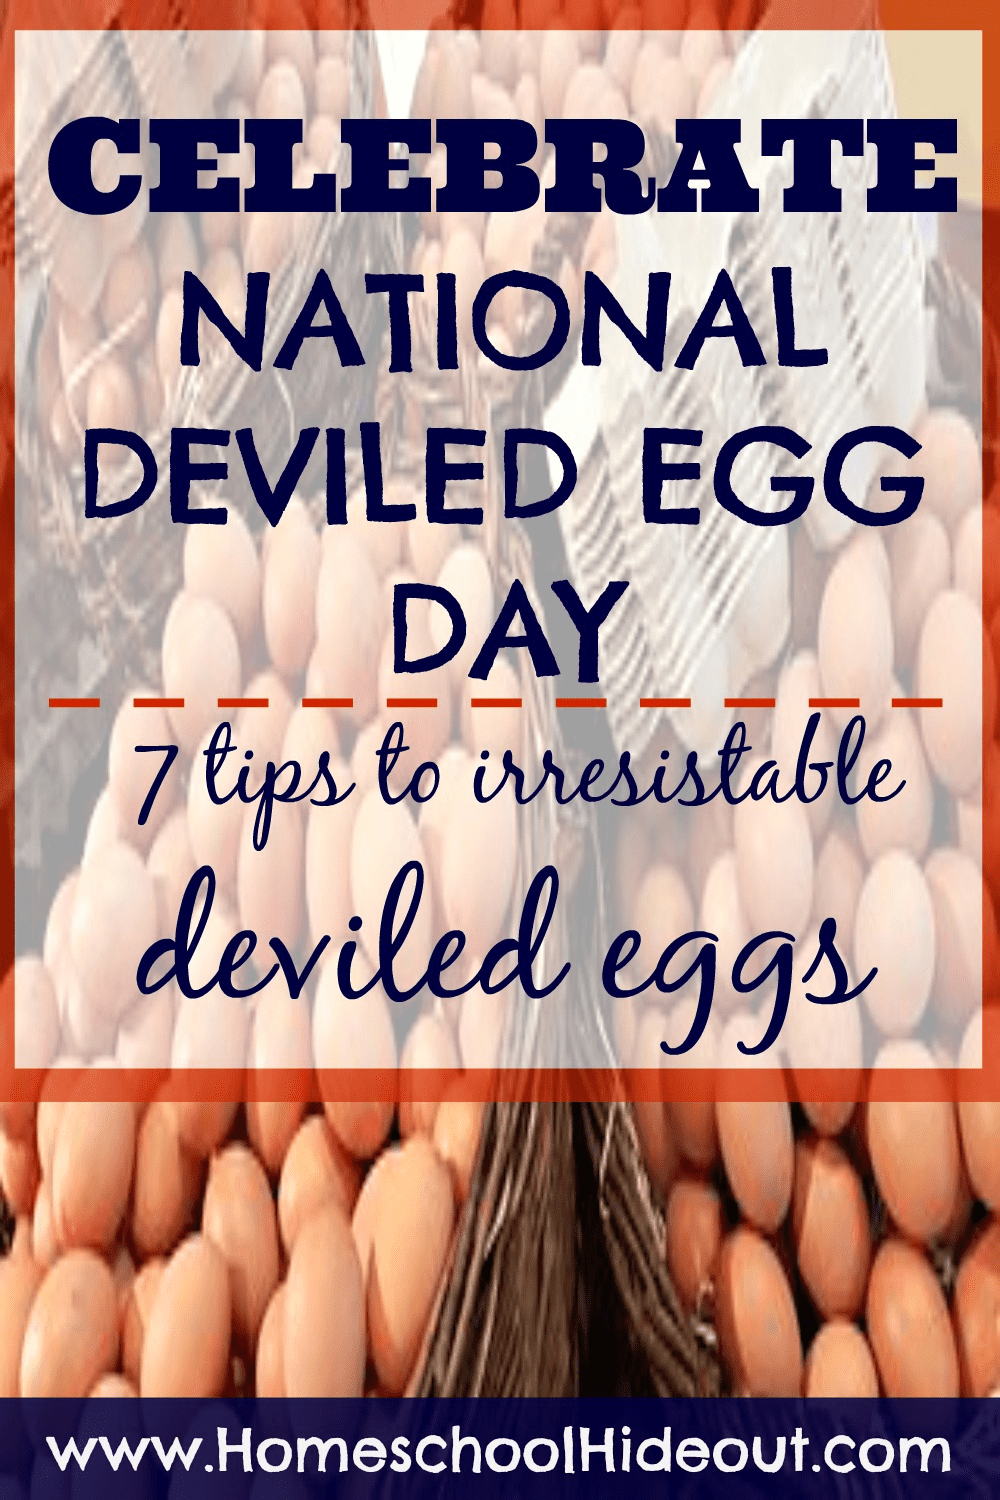 What a fun idea to elebrate National Deviled Egg Day! Not to mention tip #4 is pure genius!